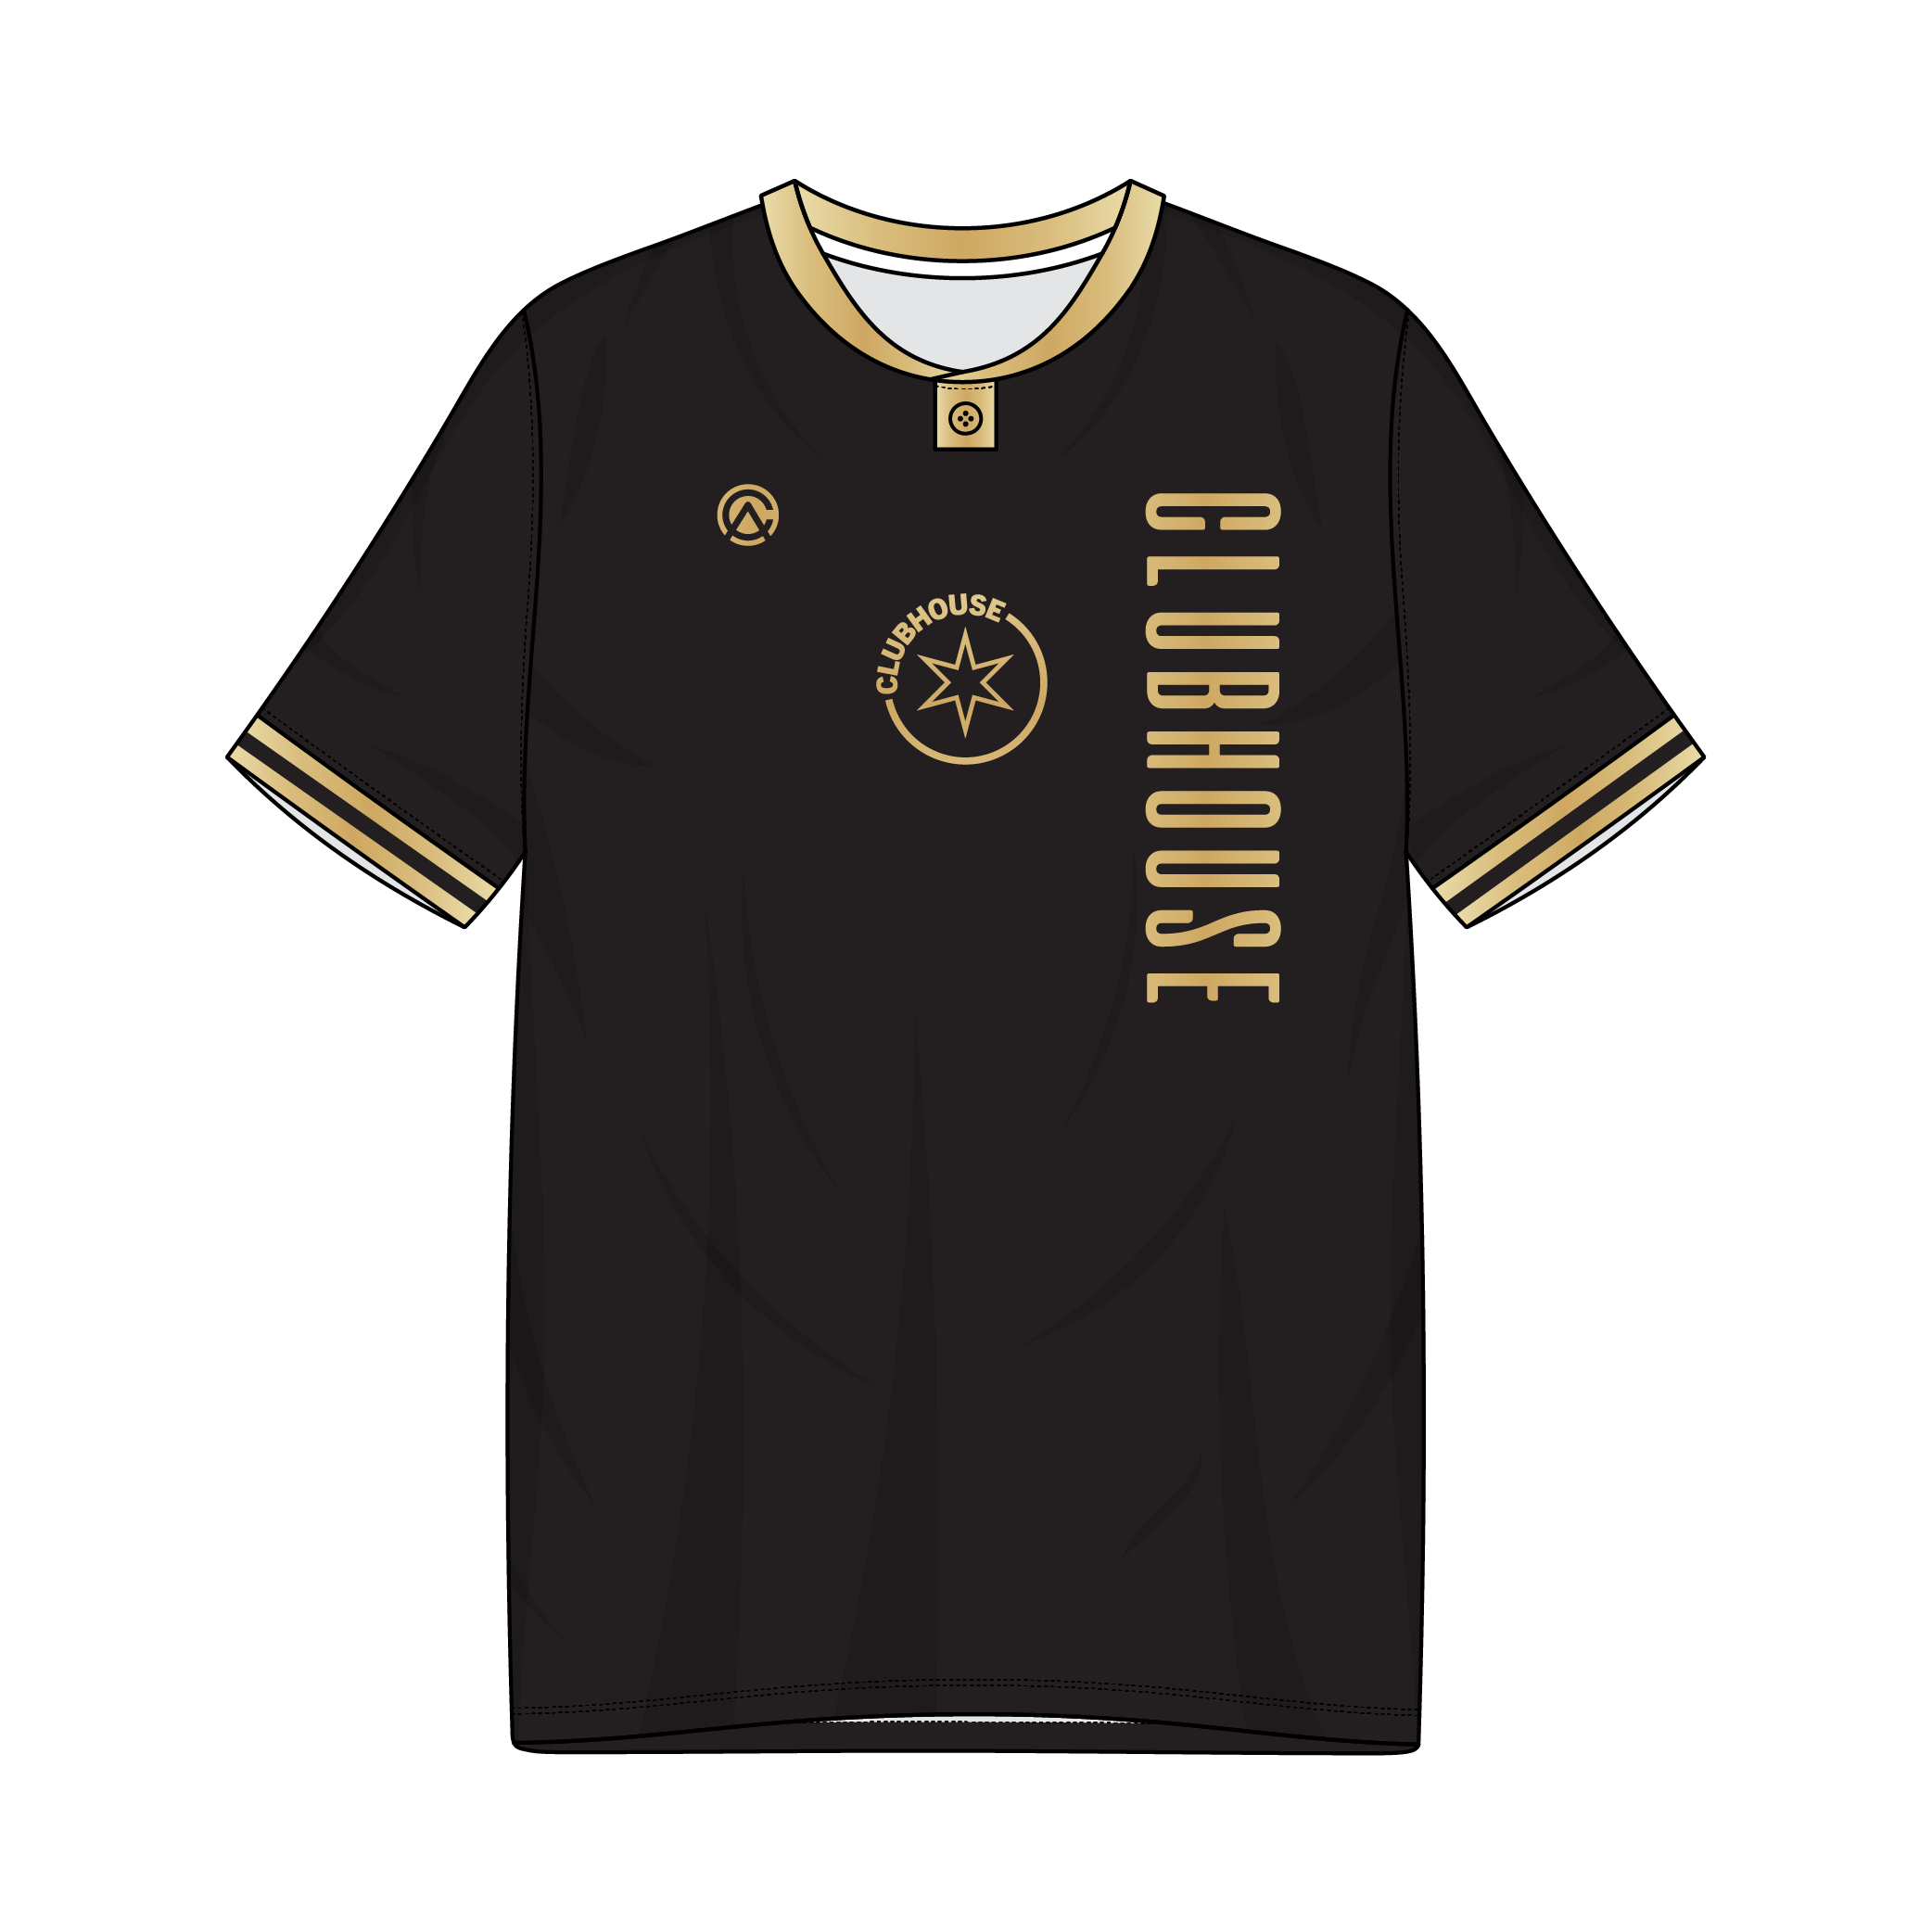 Clubhouse Original: Black N' Gold Soccer Jersey